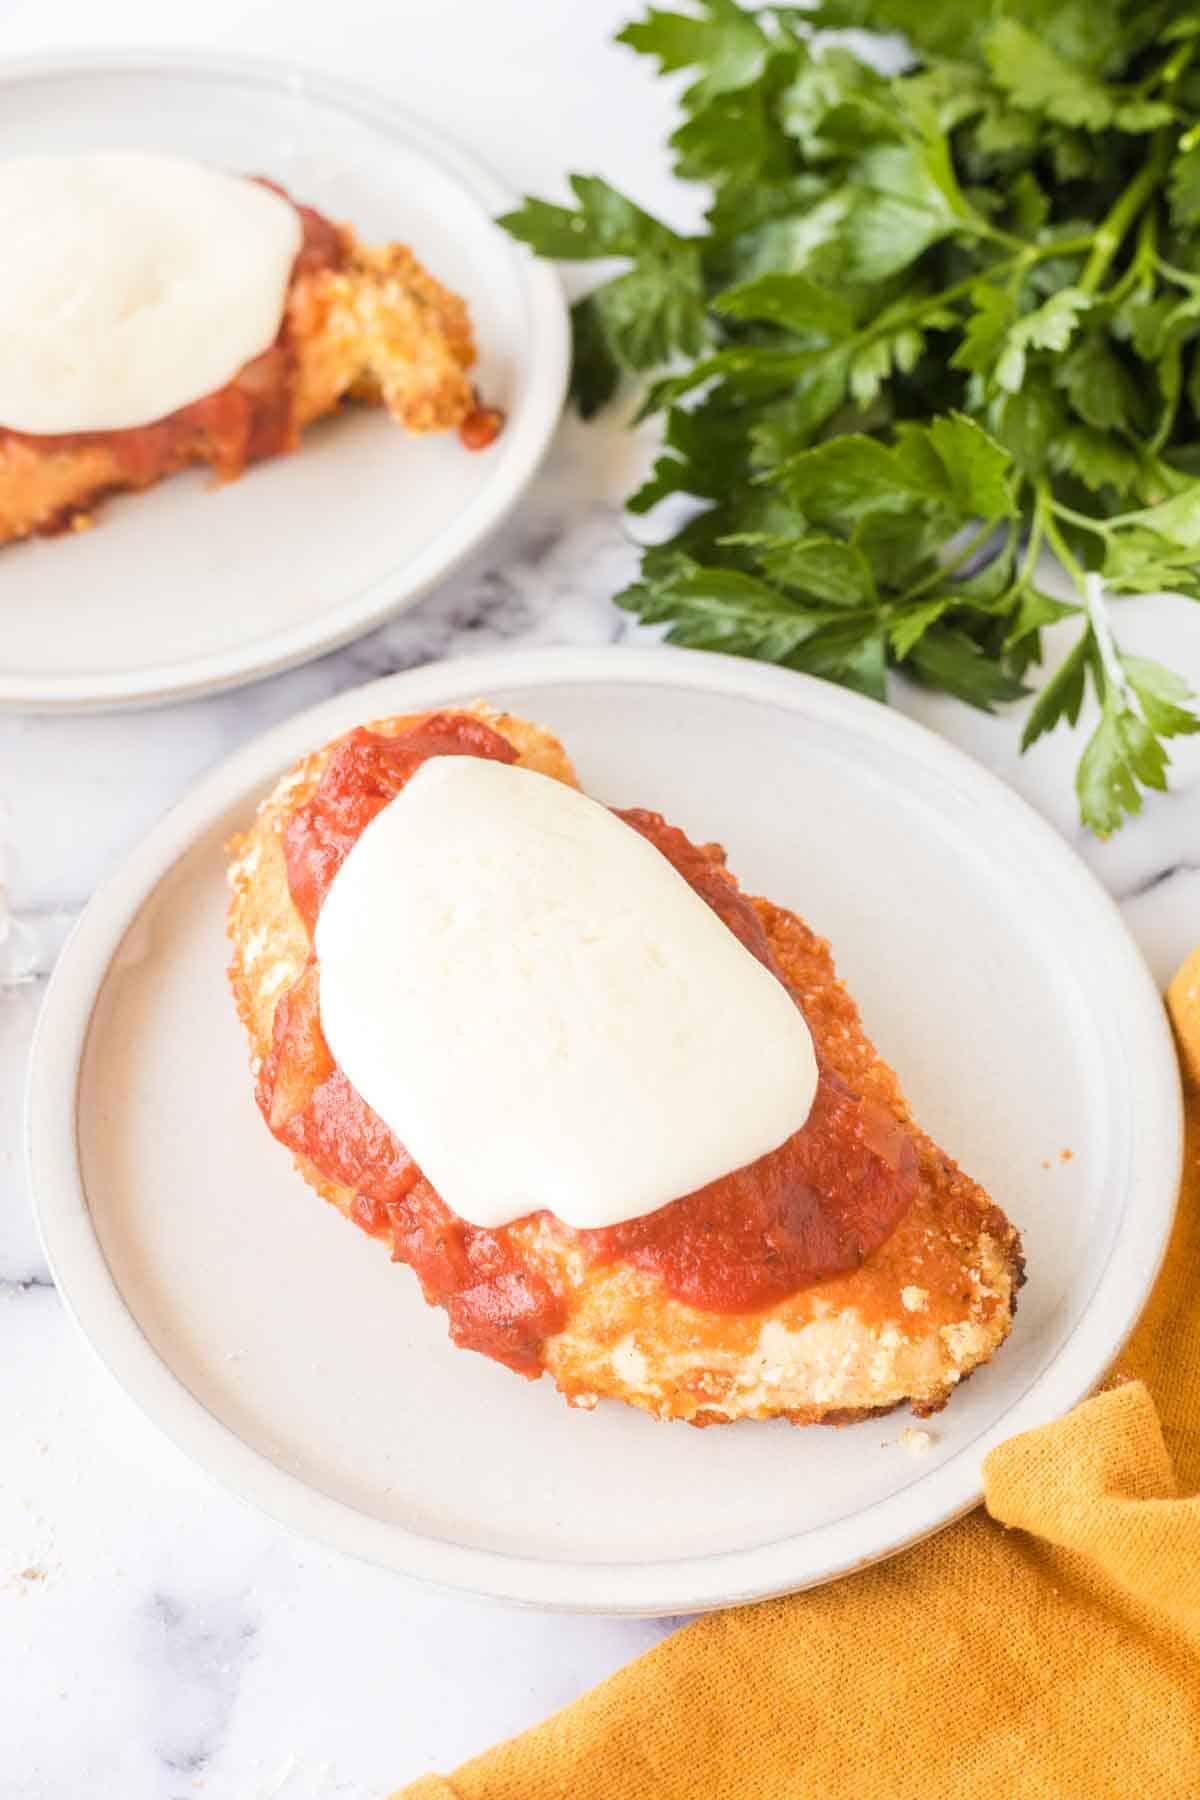 Plated baked chicken parmesan